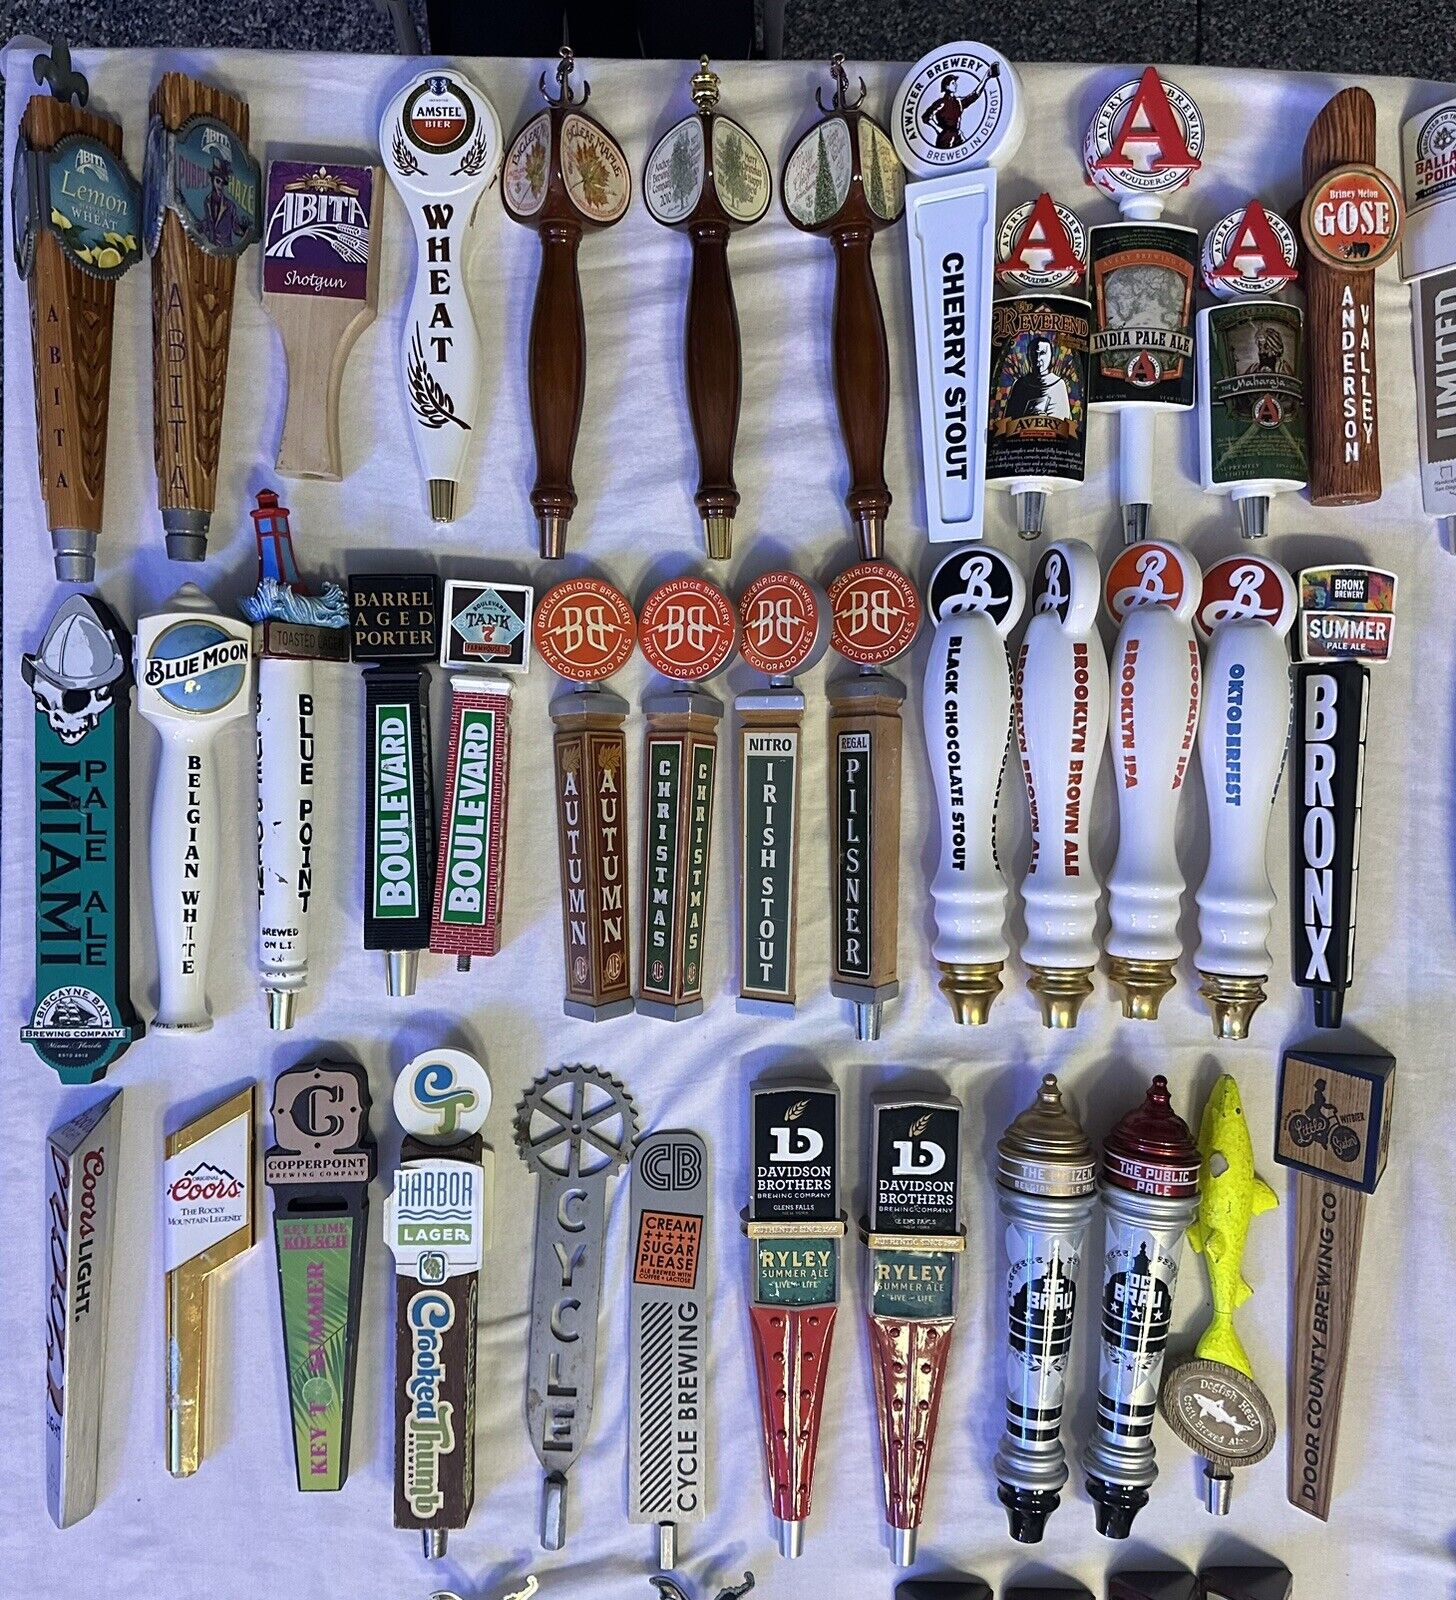 Beer Tap Handles/Toppers - PICK YOUR OWN - $20 each - VOLUME DISCOUNTS 4/2/24